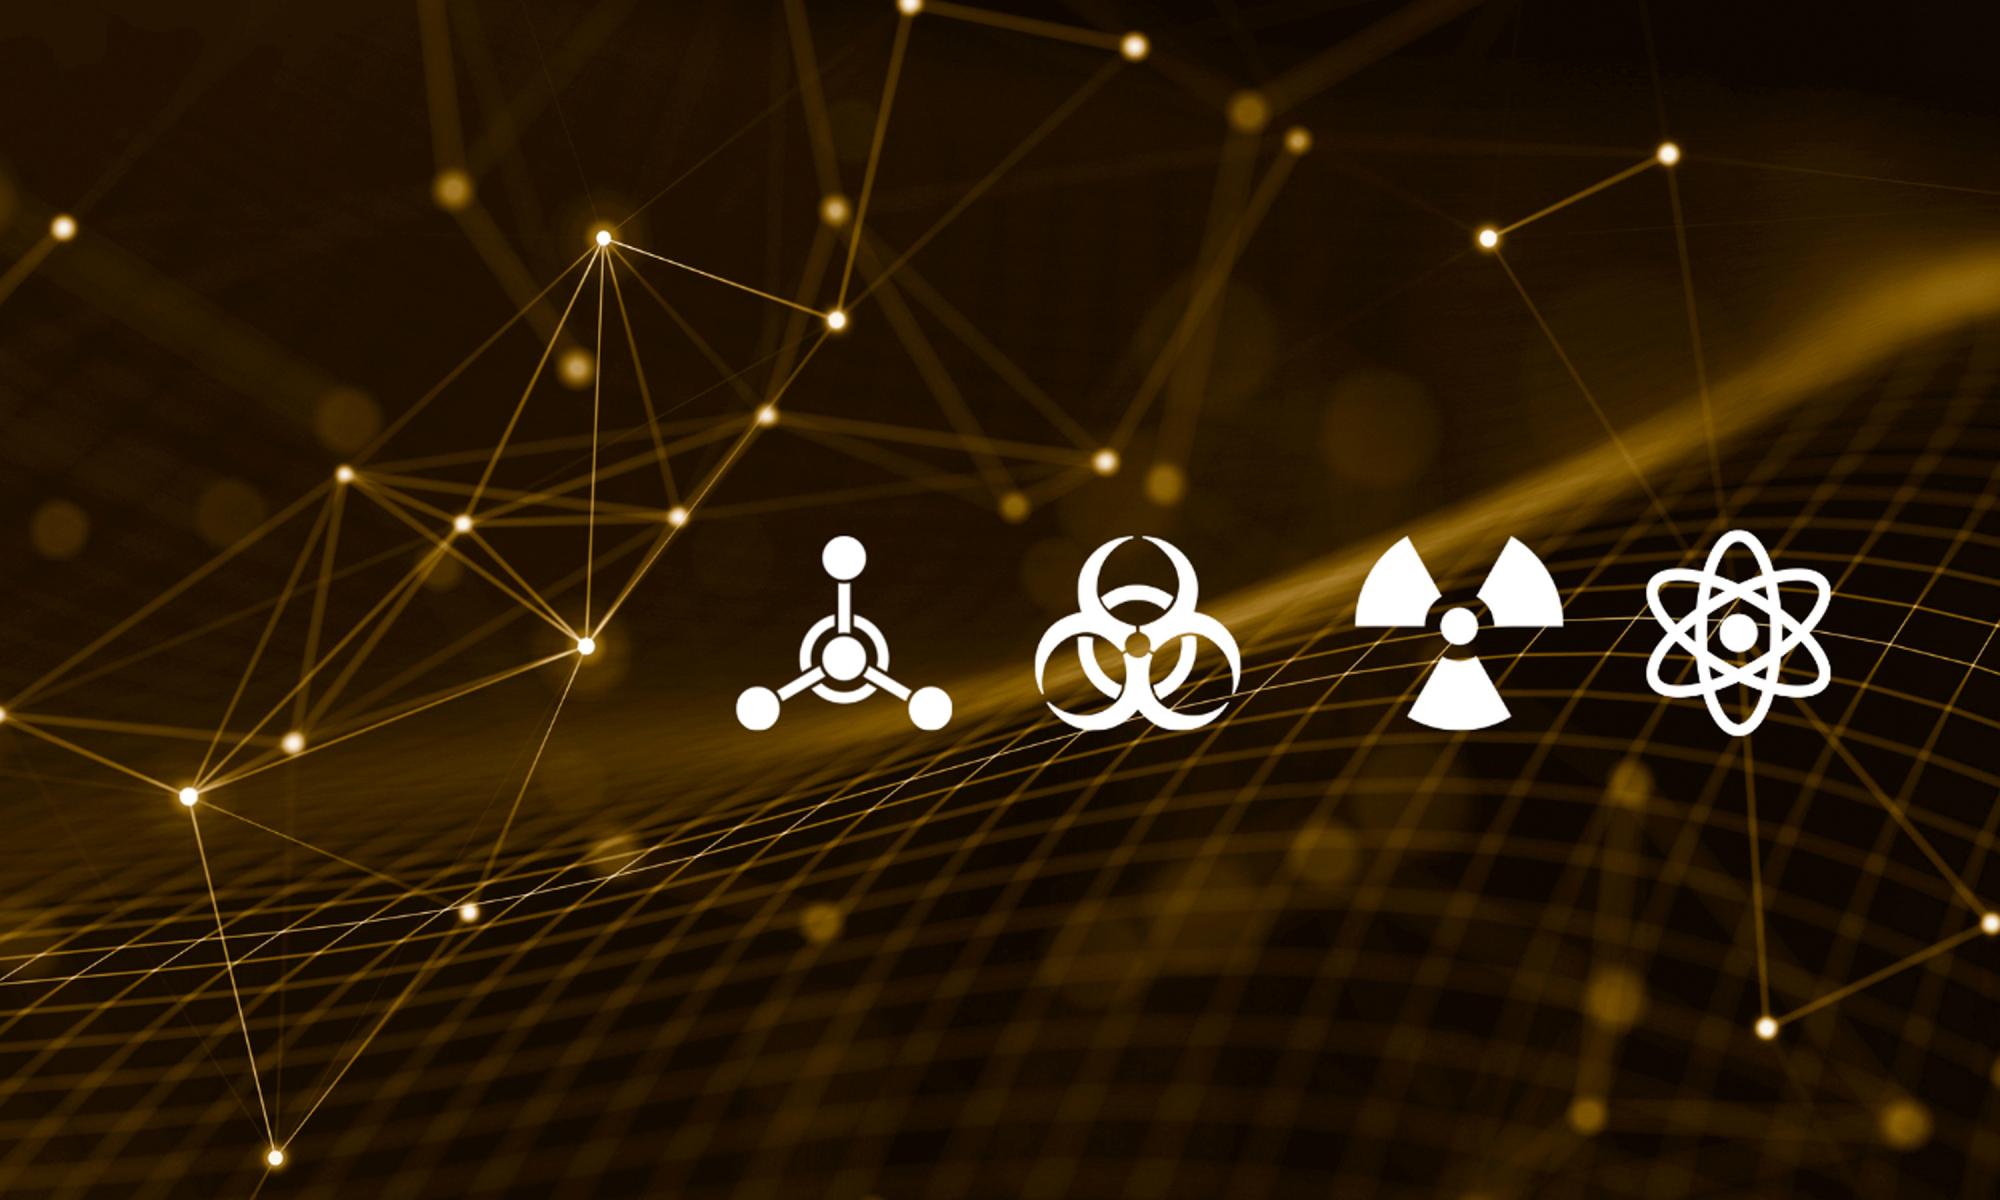 Chemical, Biological, Radiological, and Nuclear icons over an abstract grid image